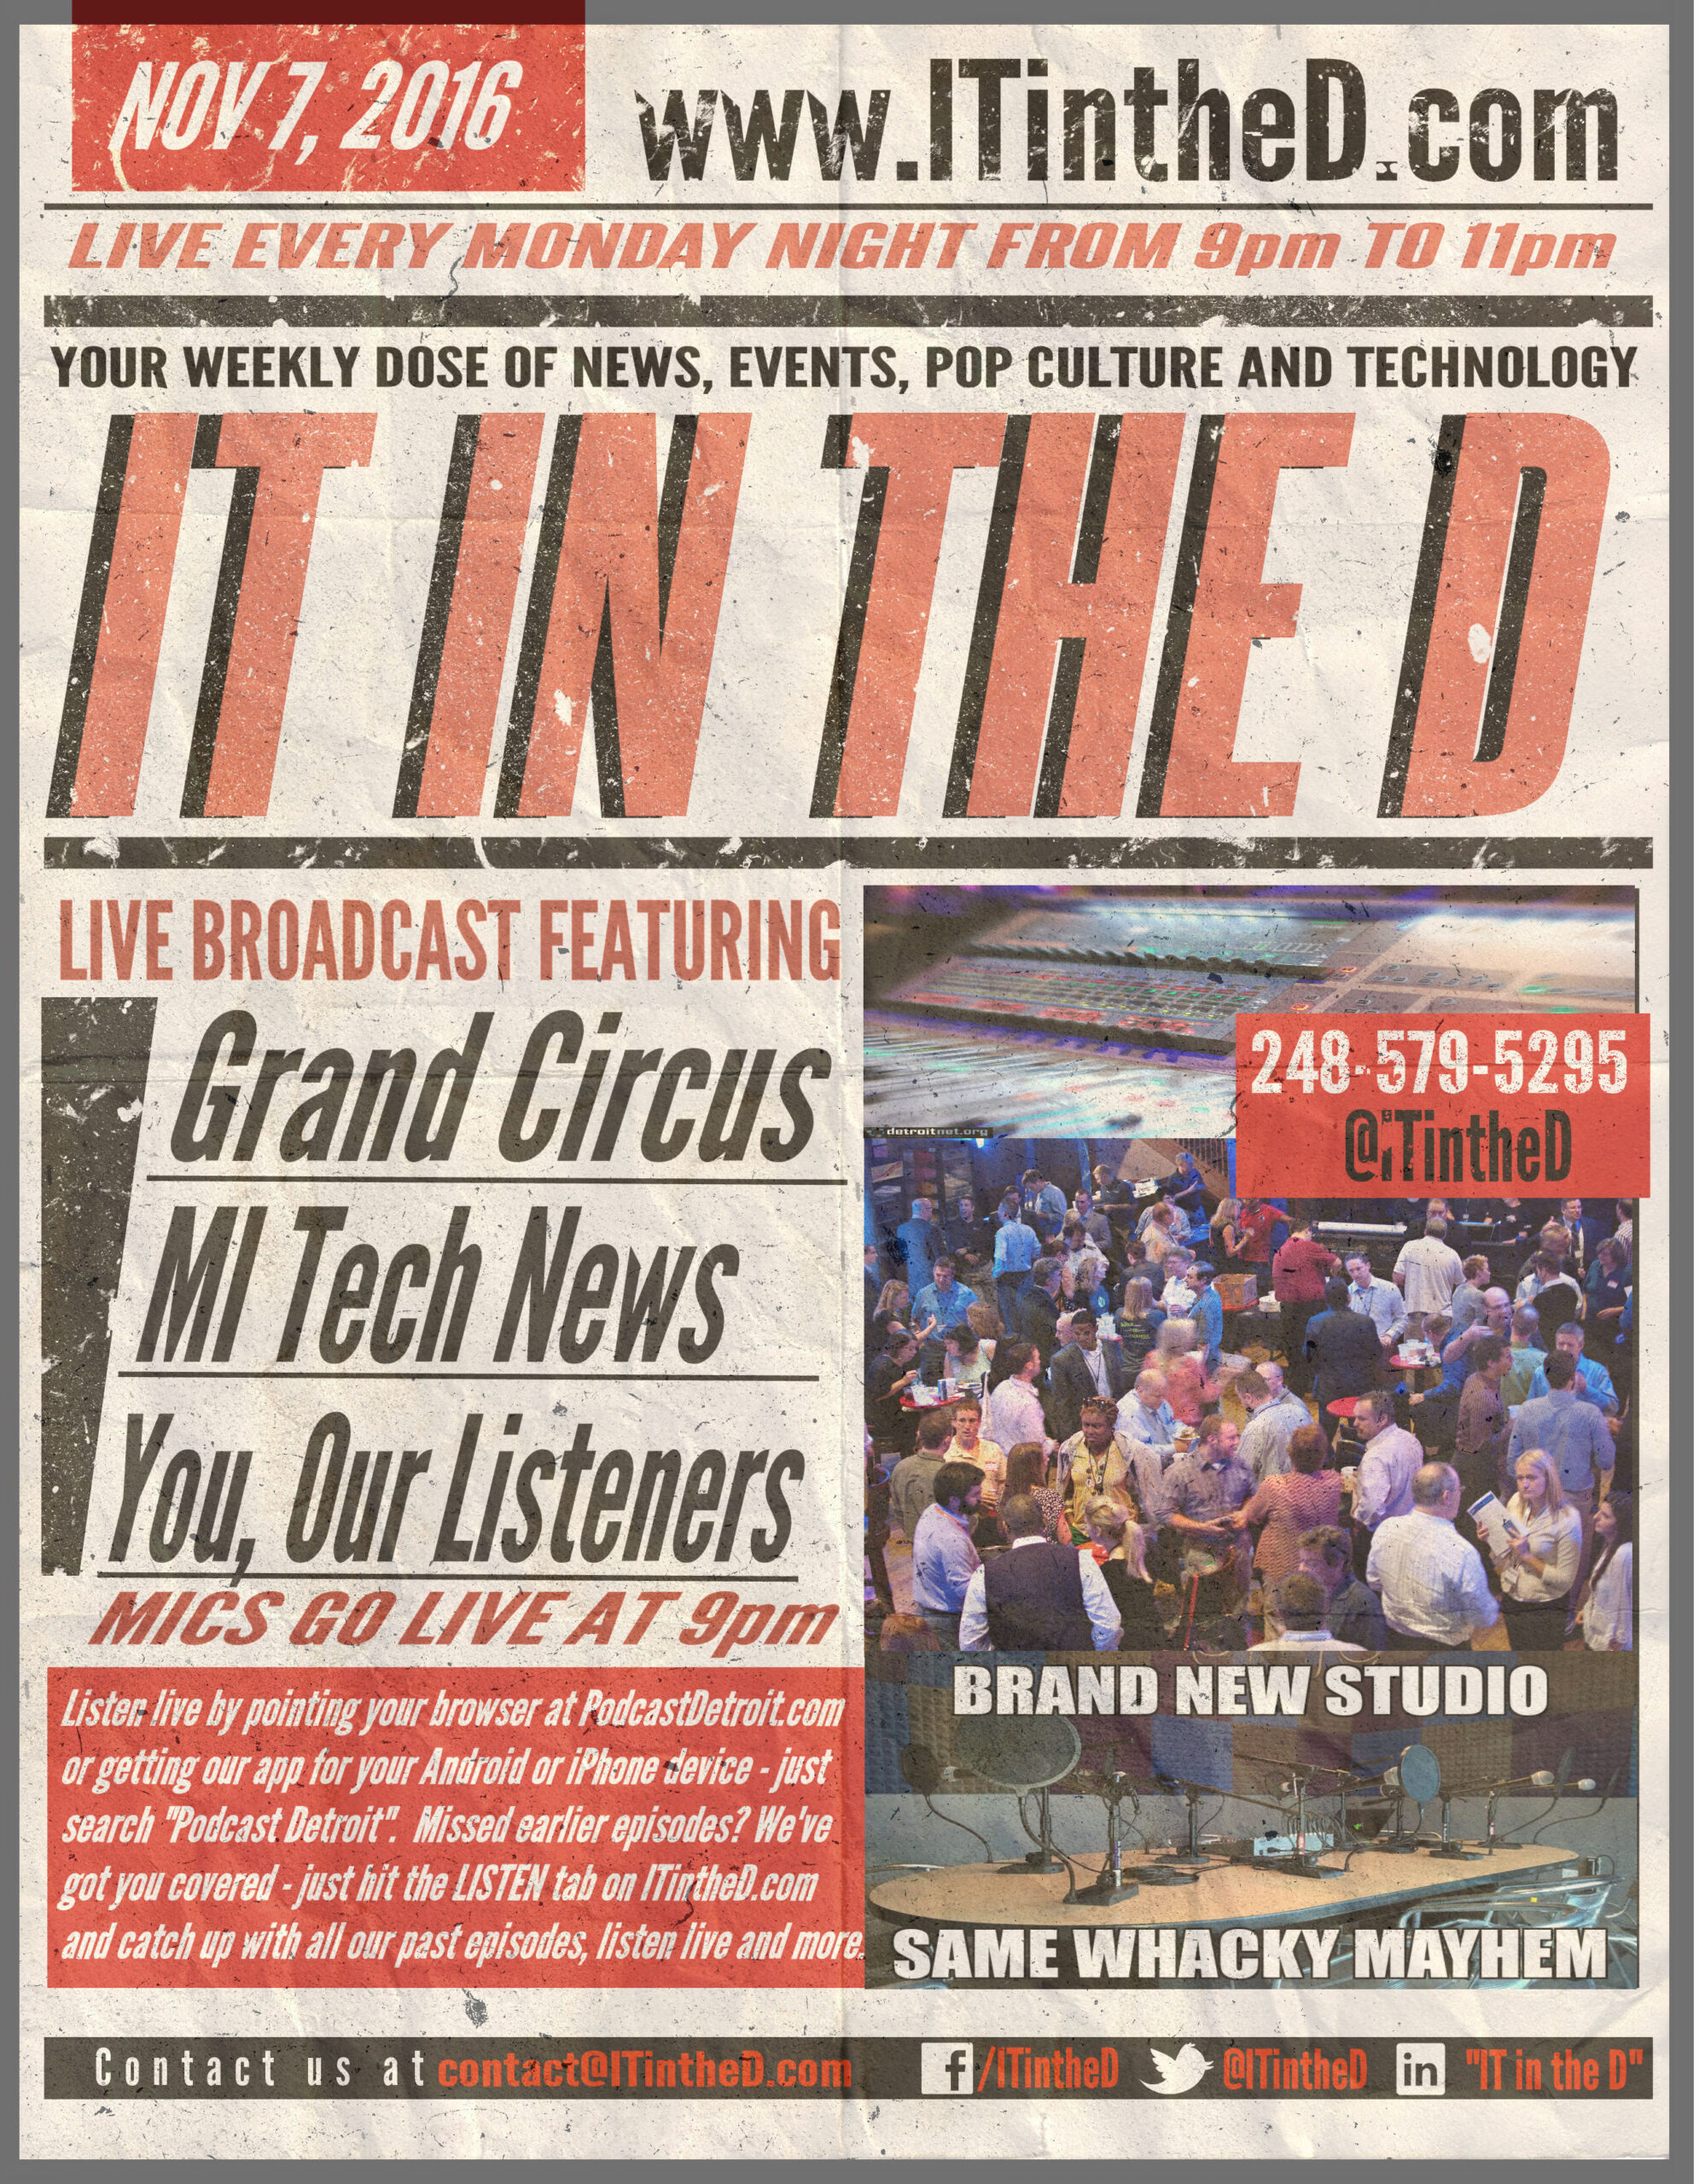 Grand Circus, MITechNews In Studio Tonight, Fantasticon This Weekend, Event Updates and More for 11/7/2016